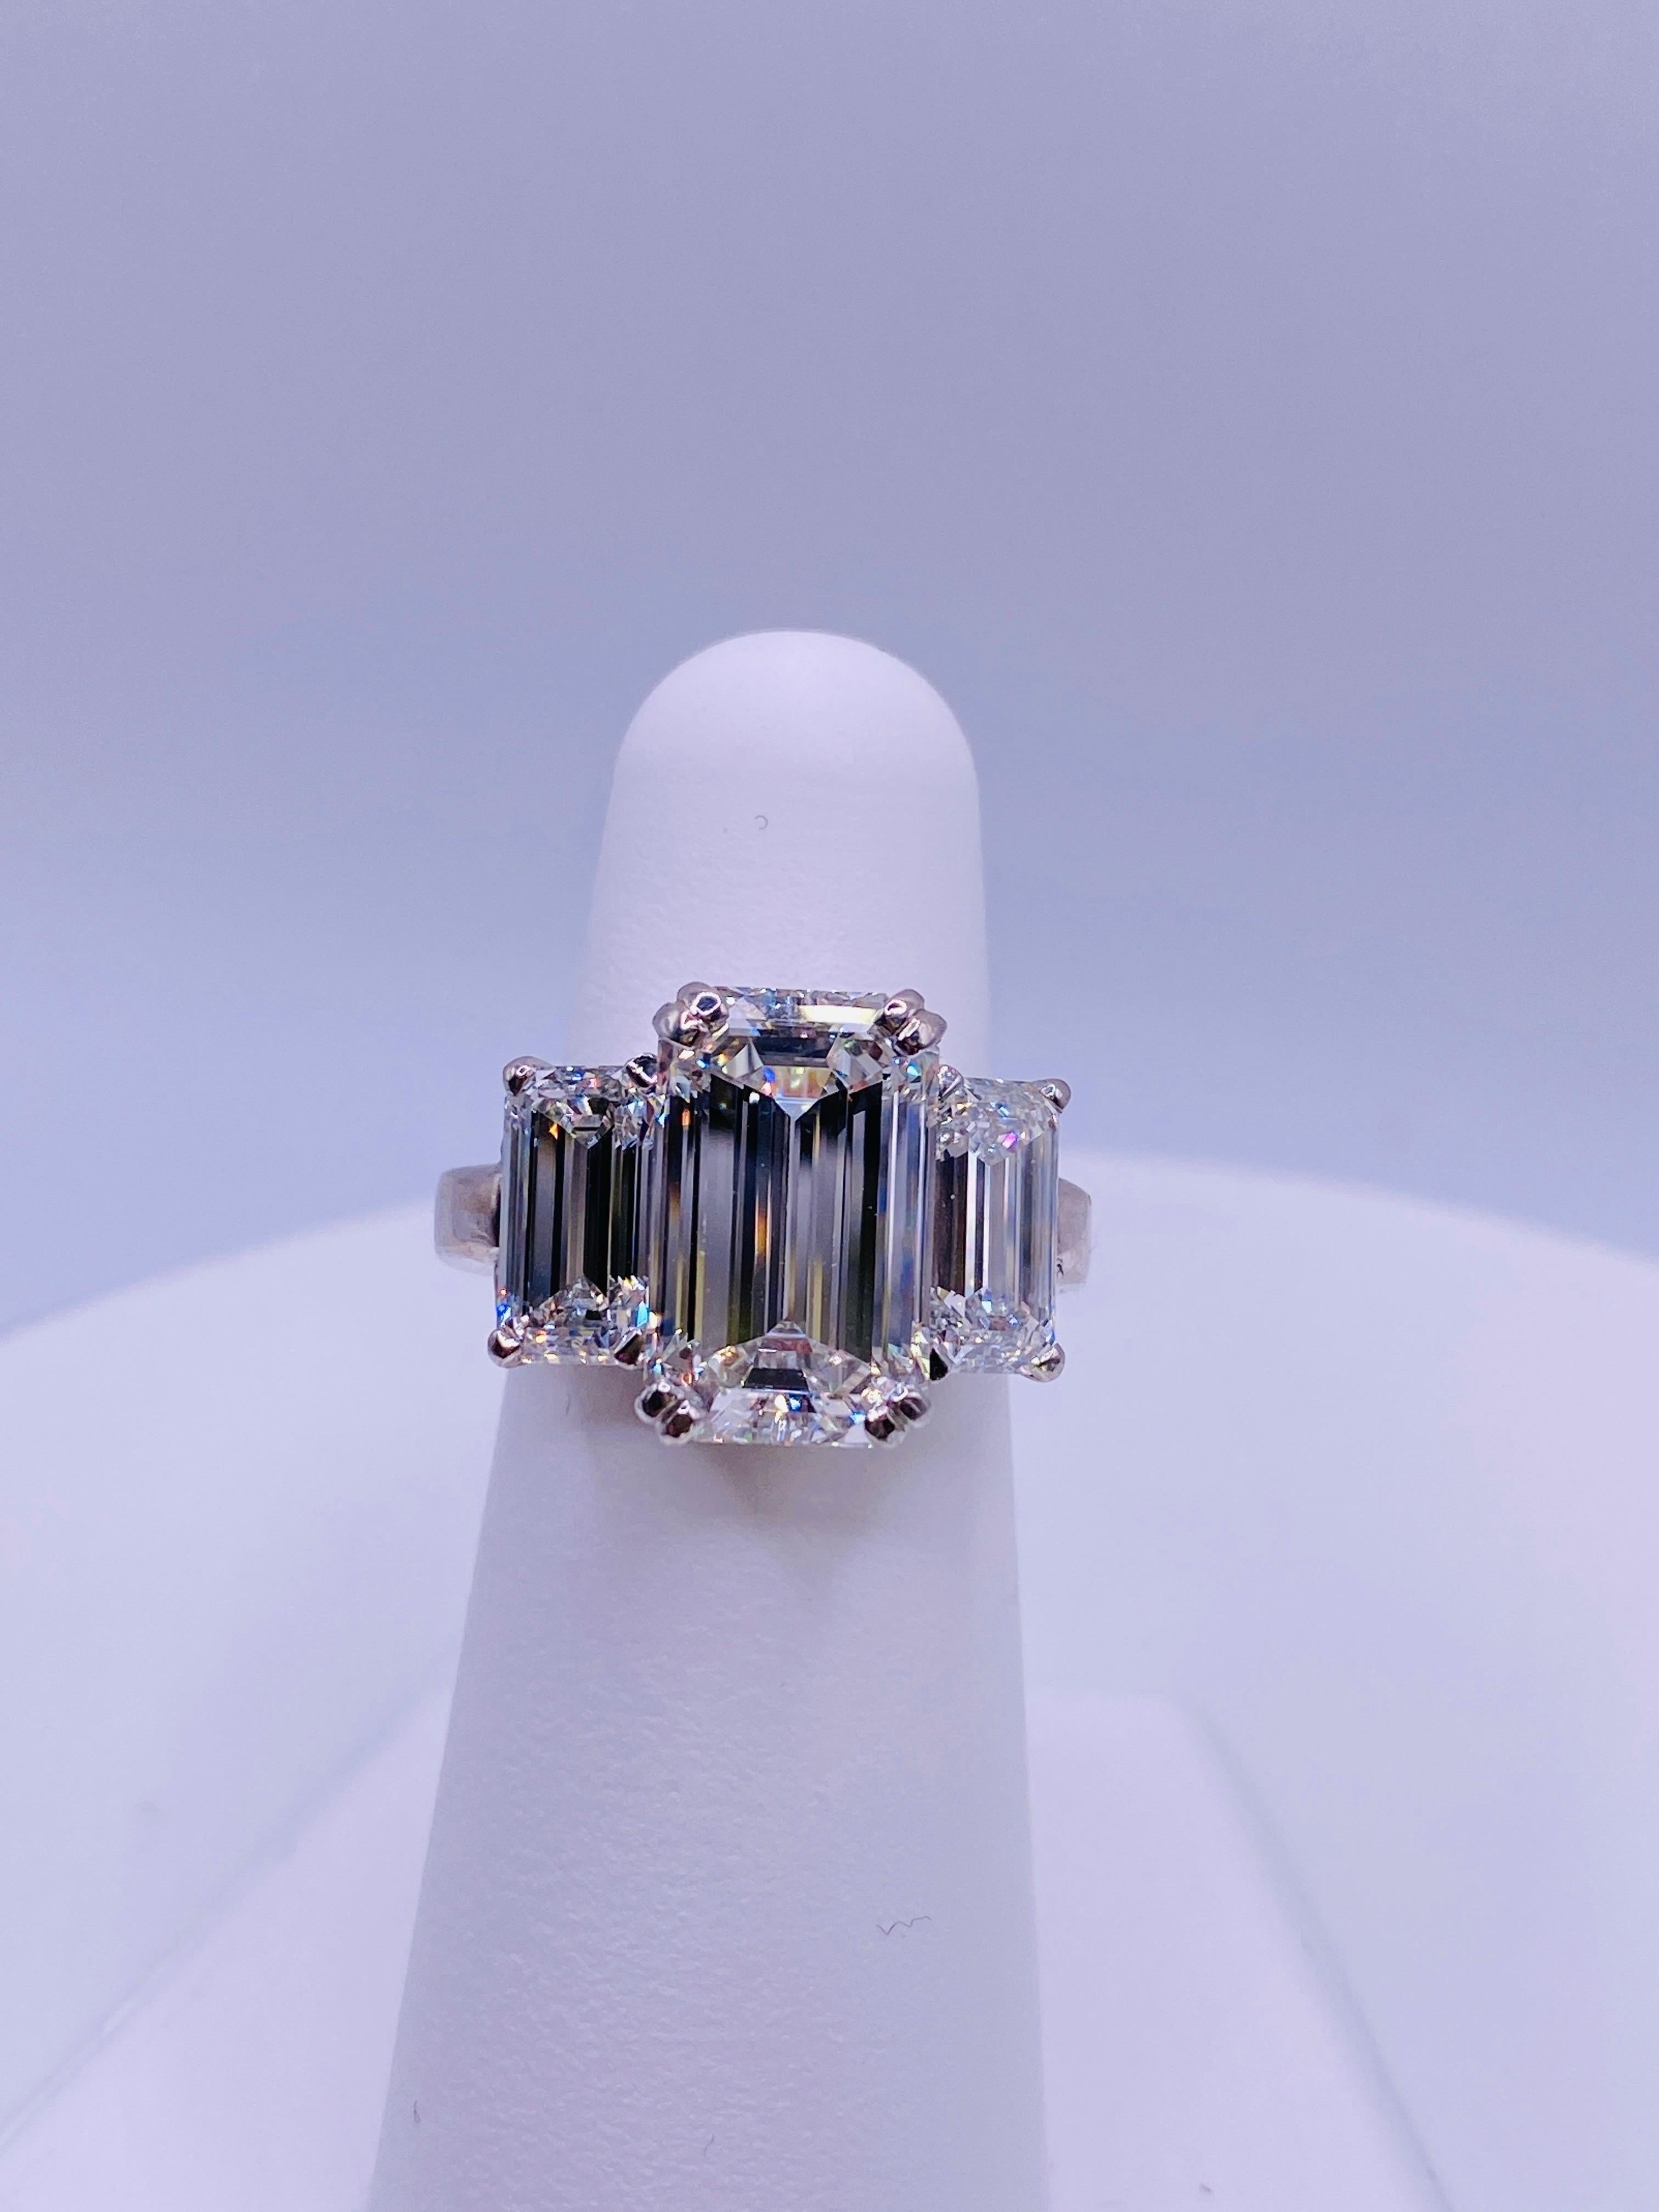 14K white gold and platinum ring with 6.1 carat F Vs1 GIA certified emerald-cut center diamond with 2= 2.9 carat total weight E Vs1 emerald-cut side diamonds. Setting is platinum, shank is 14K white gold. Size 5.5